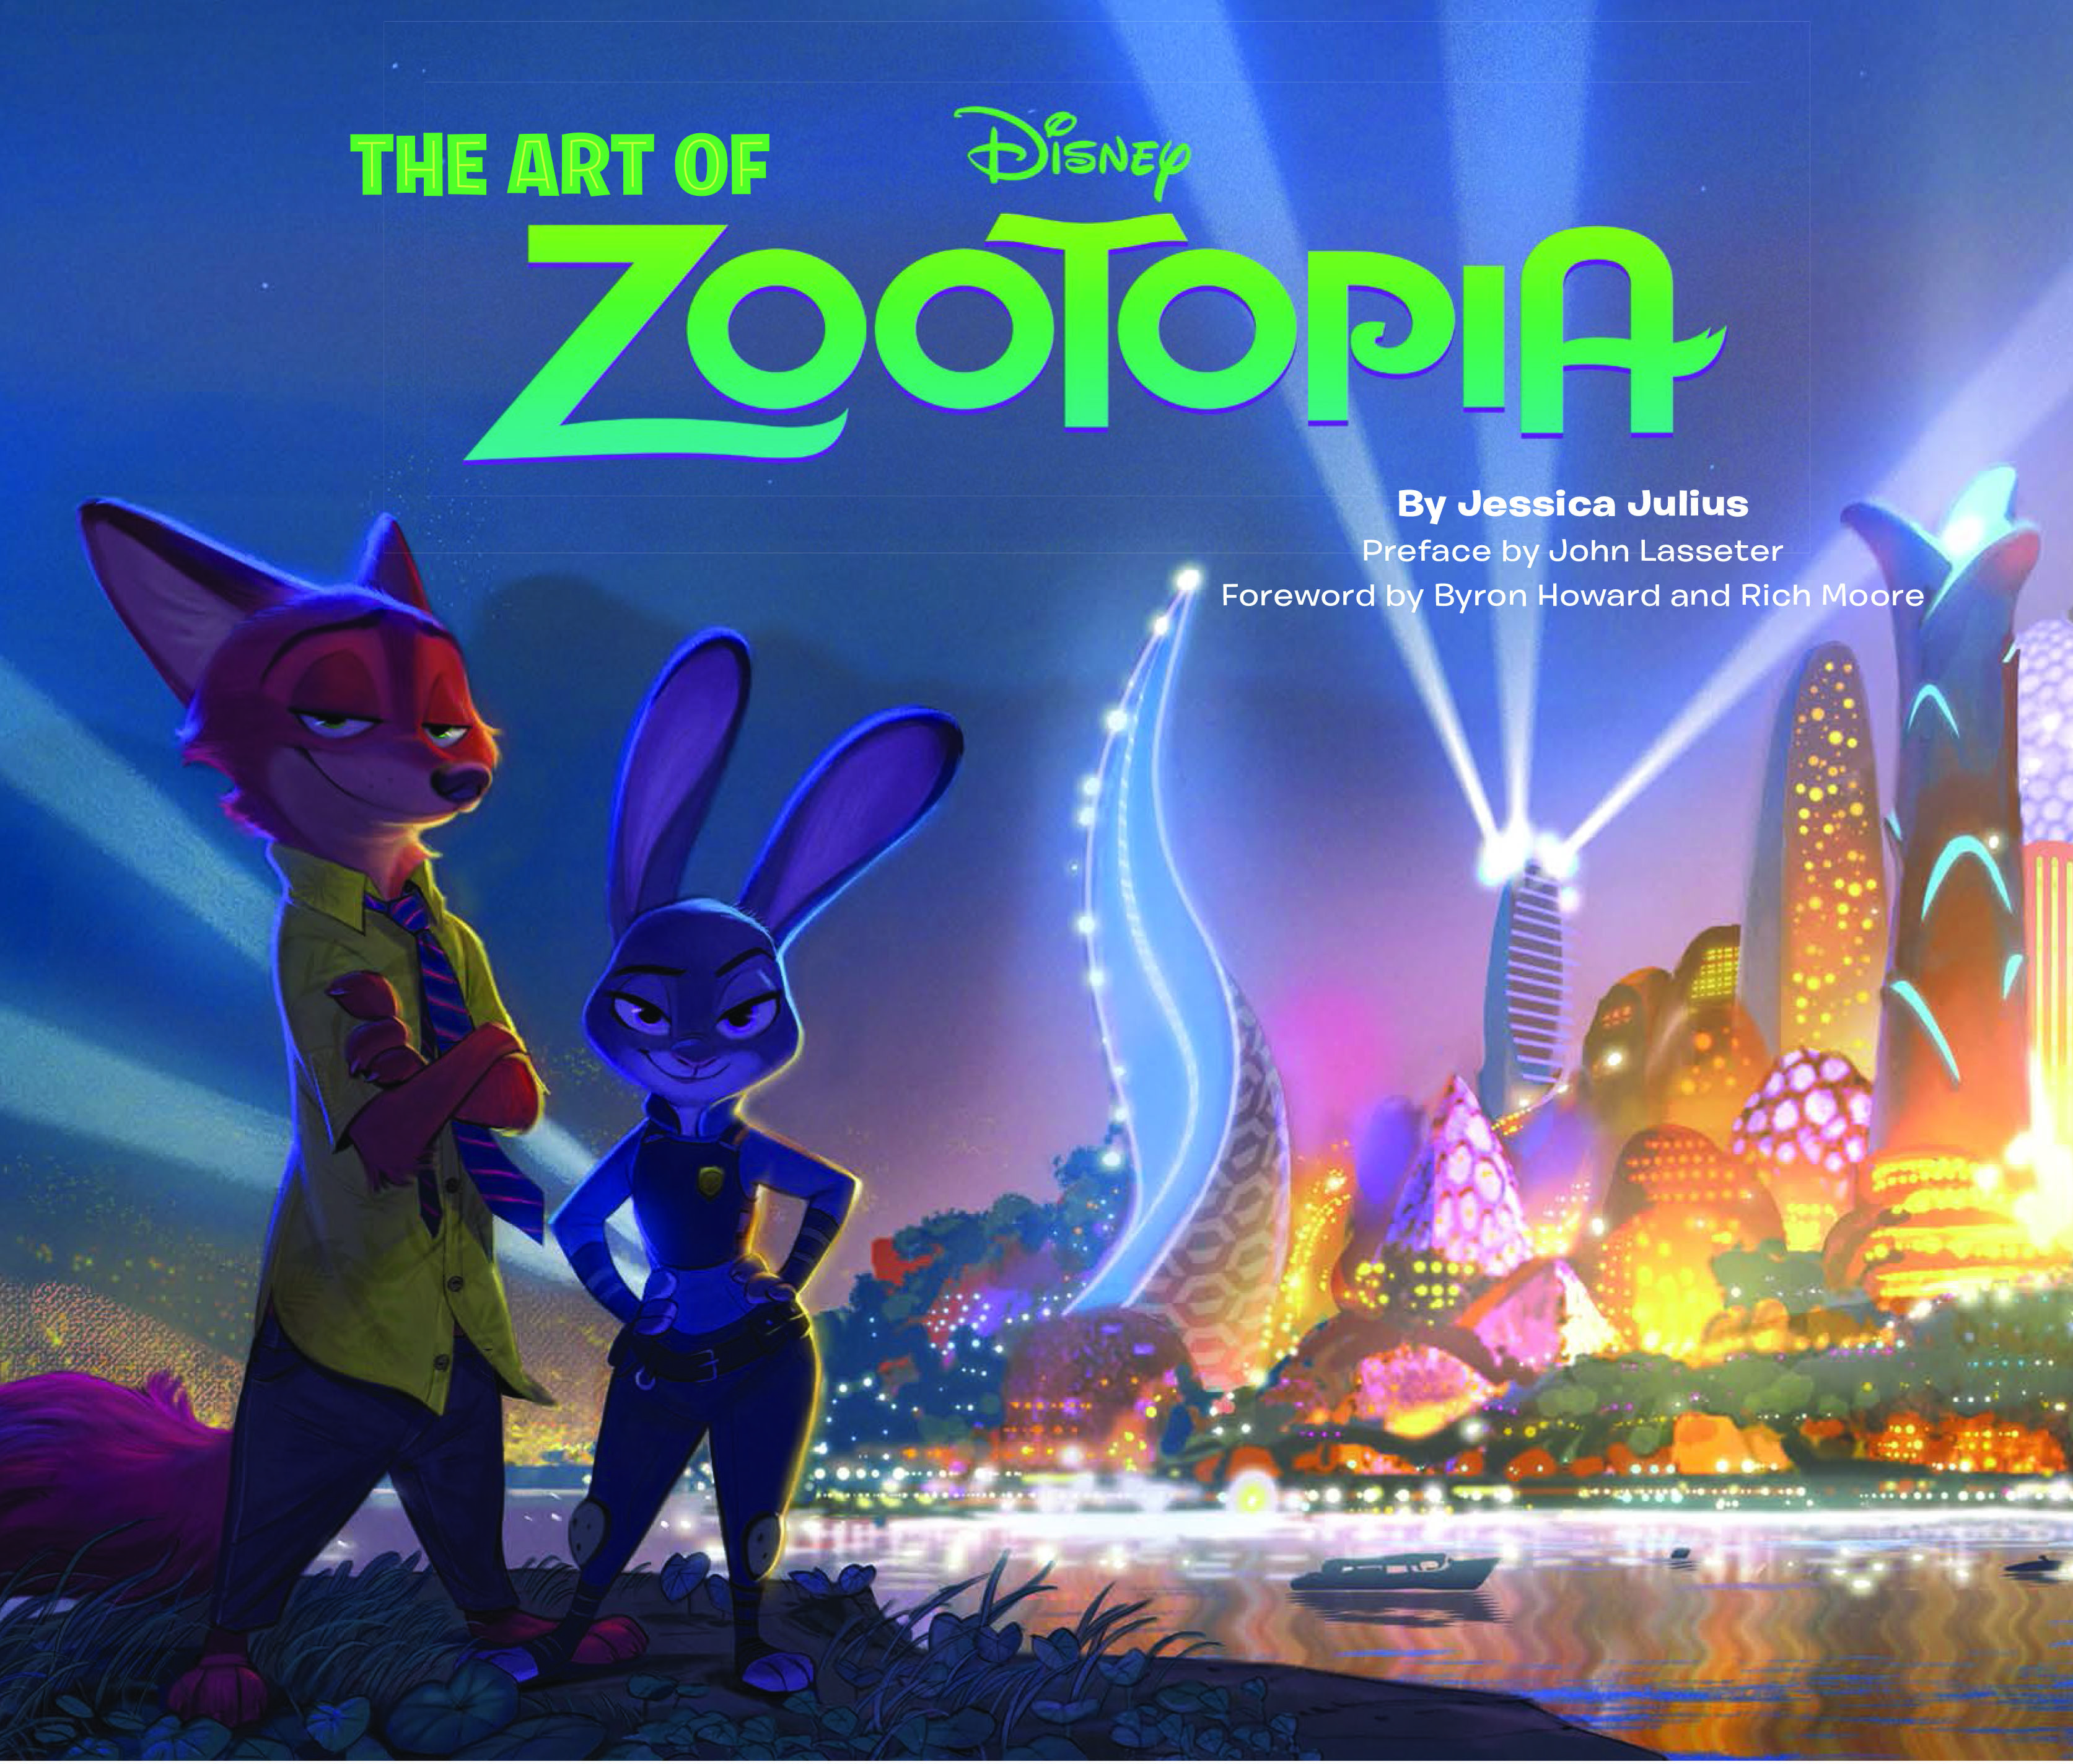 The Art of Zootopia by Jessica Julius - Hardcover